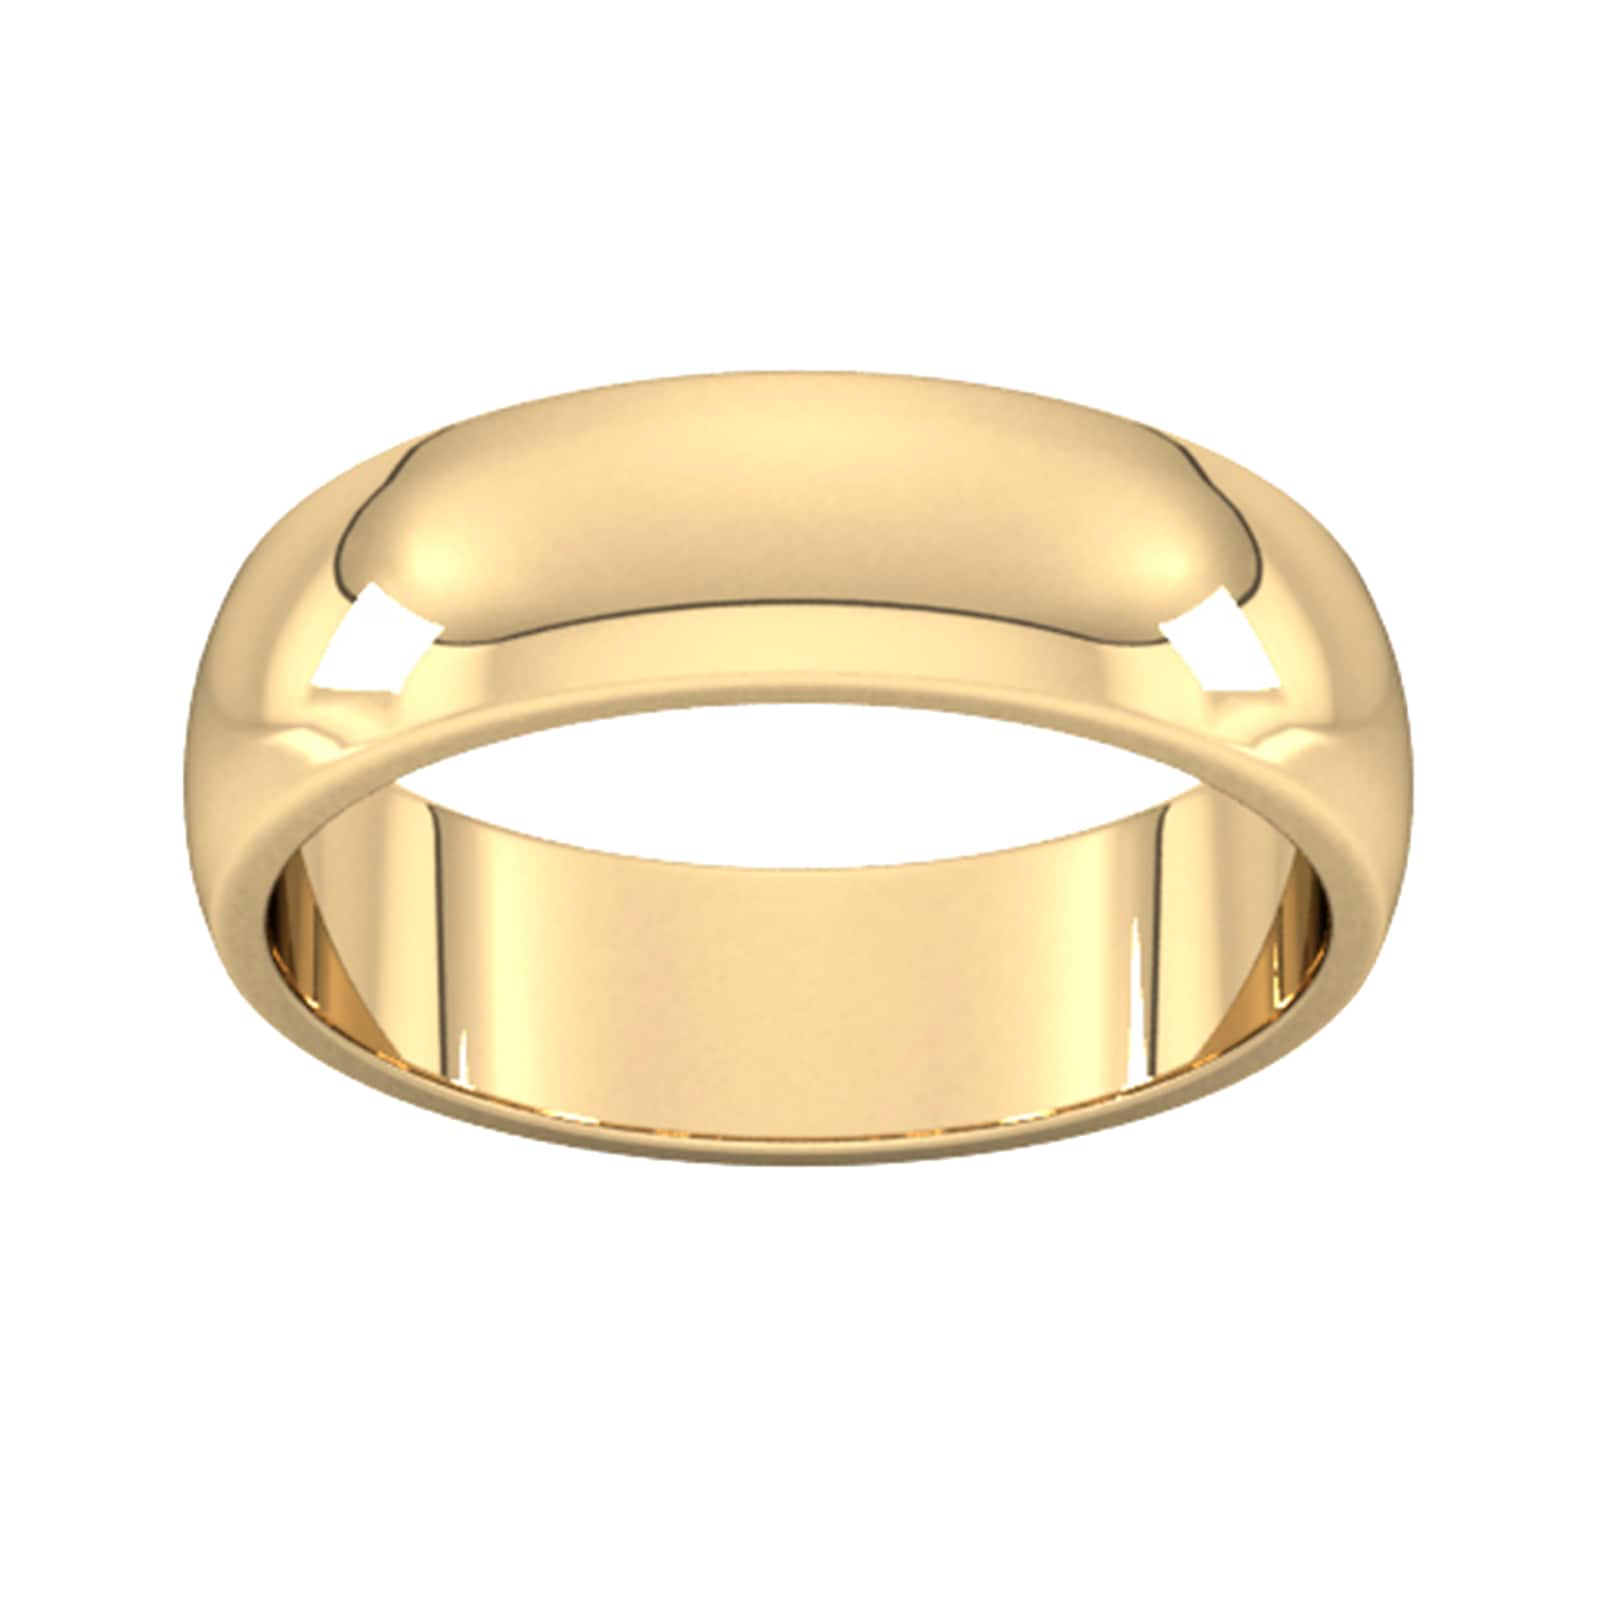 6mm D Shape Heavy Wedding Ring In 9 Carat Yellow Gold - Ring Size L